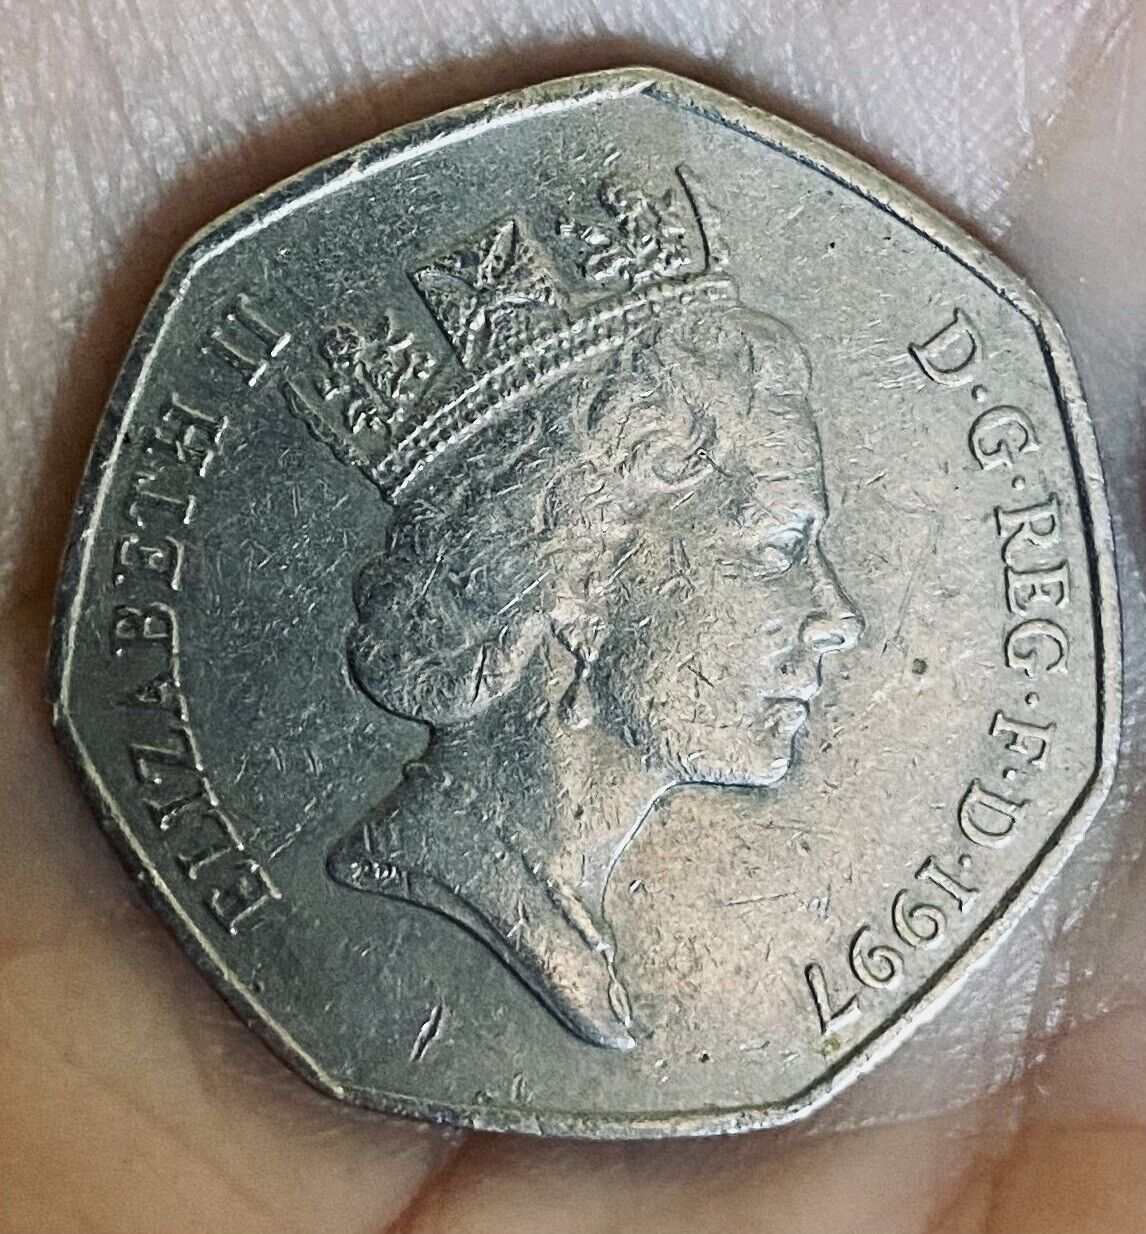 Rare 50p coin 'worth £5,' could be lurking in your wallet - Birmingham Live